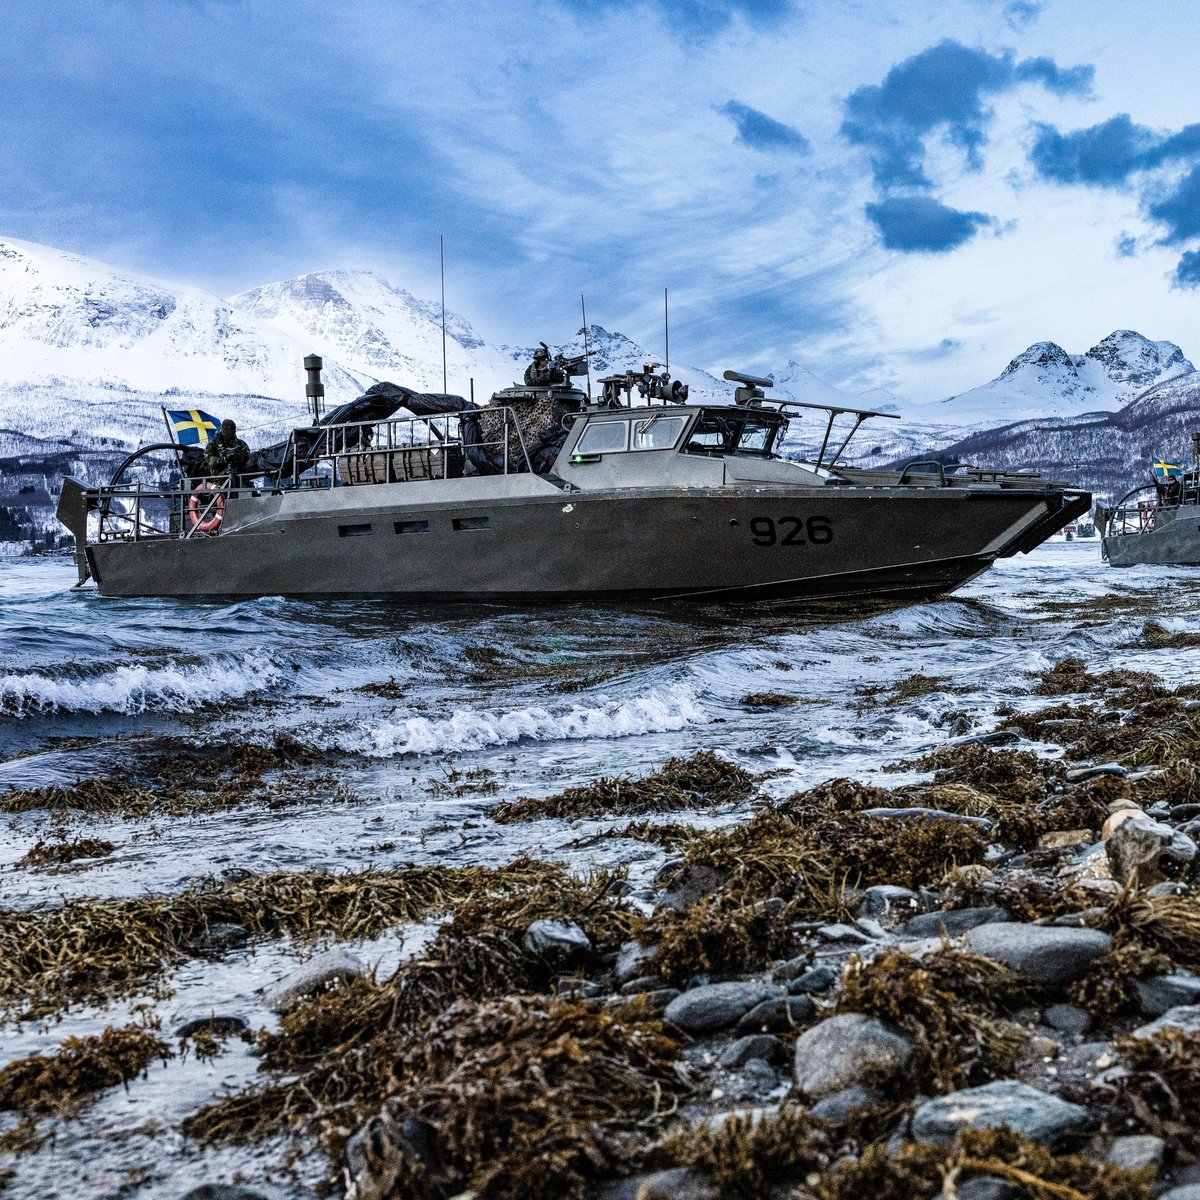 The Arctic region is of key strategic interest to #NATO due to its opportunities to cooperate. The newest addition to #NATO family, 🇸🇪Swedish & 🇫🇮Finnish marines, launched amphibious operations from a @USNavy warship in the 🇳🇴Norwegian Arctic. #SteadfastDefender24 #WeAreNATO